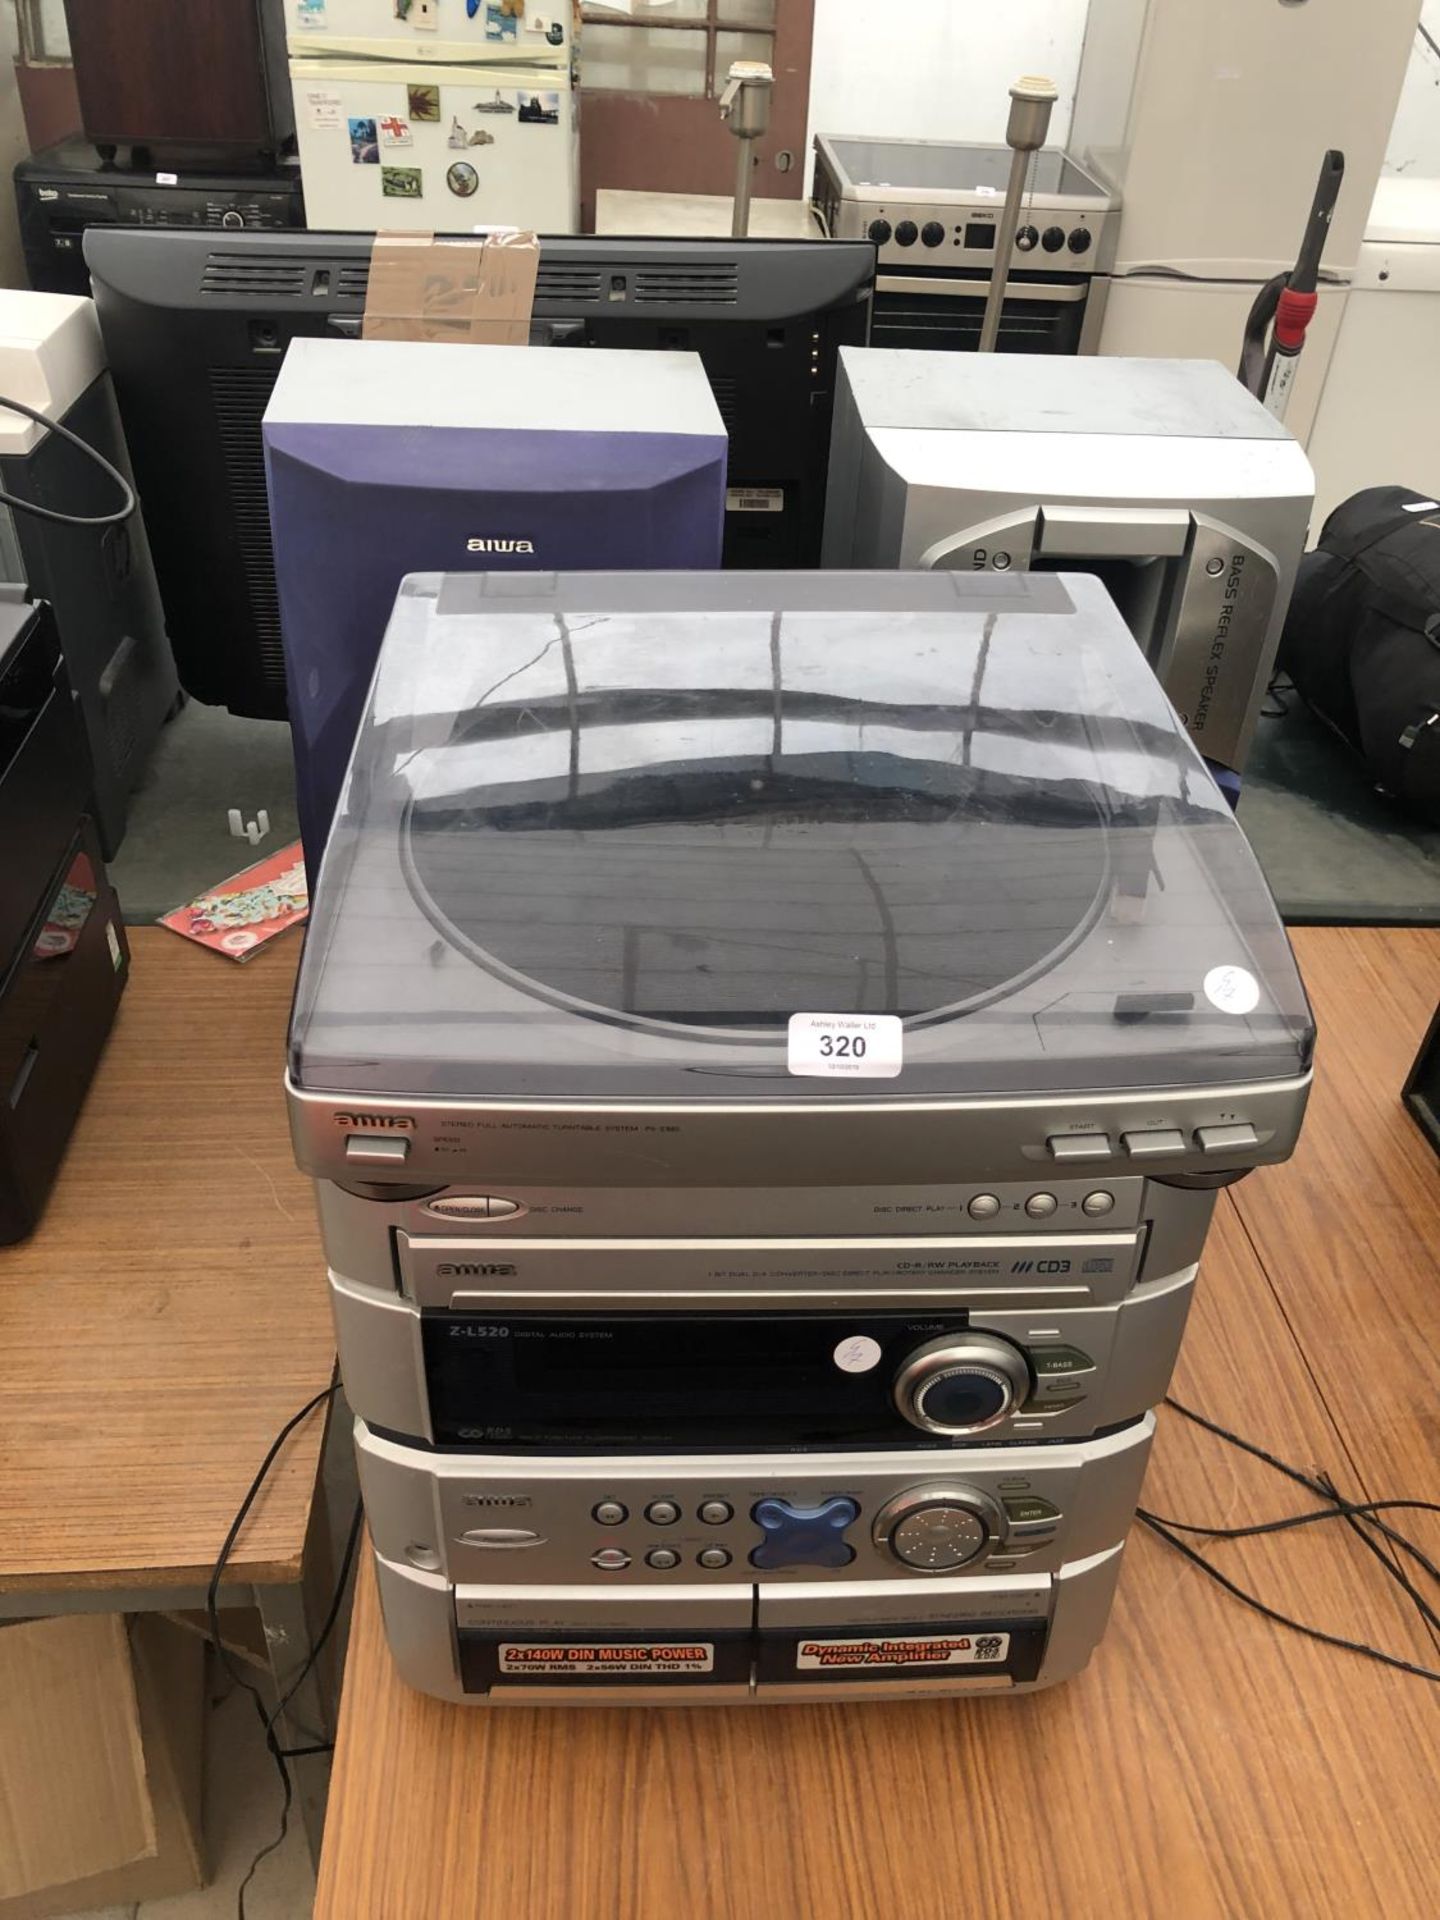 A CD AND RECORD PLAYER IN WORKING ORDER